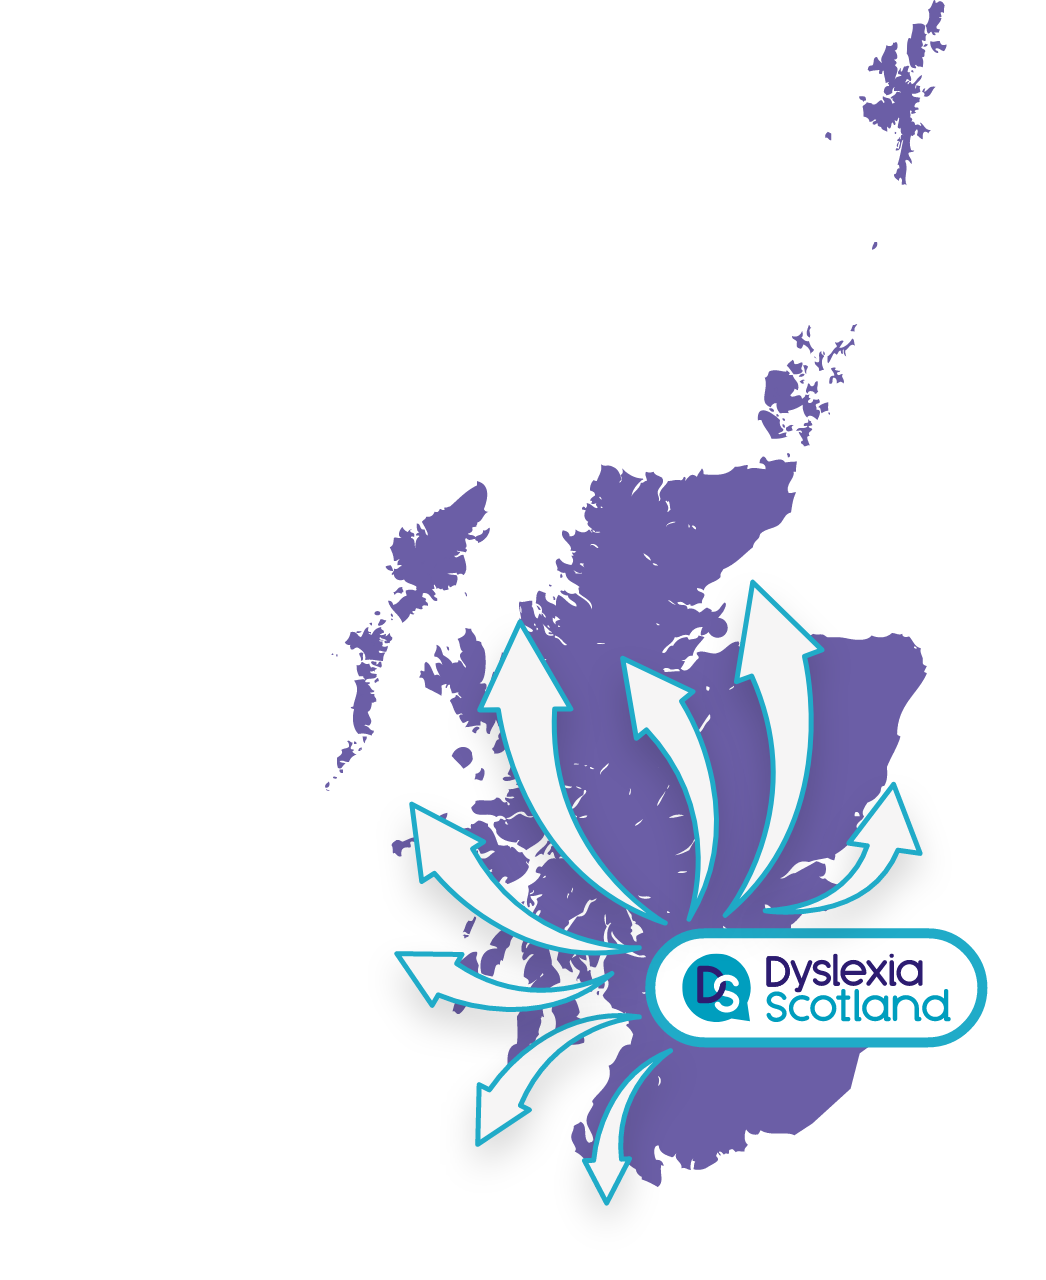 Map of Scotland overlaid with the dyslexia Scotland logo and arrows indicating that Dyslexia Scotland is active all over the country